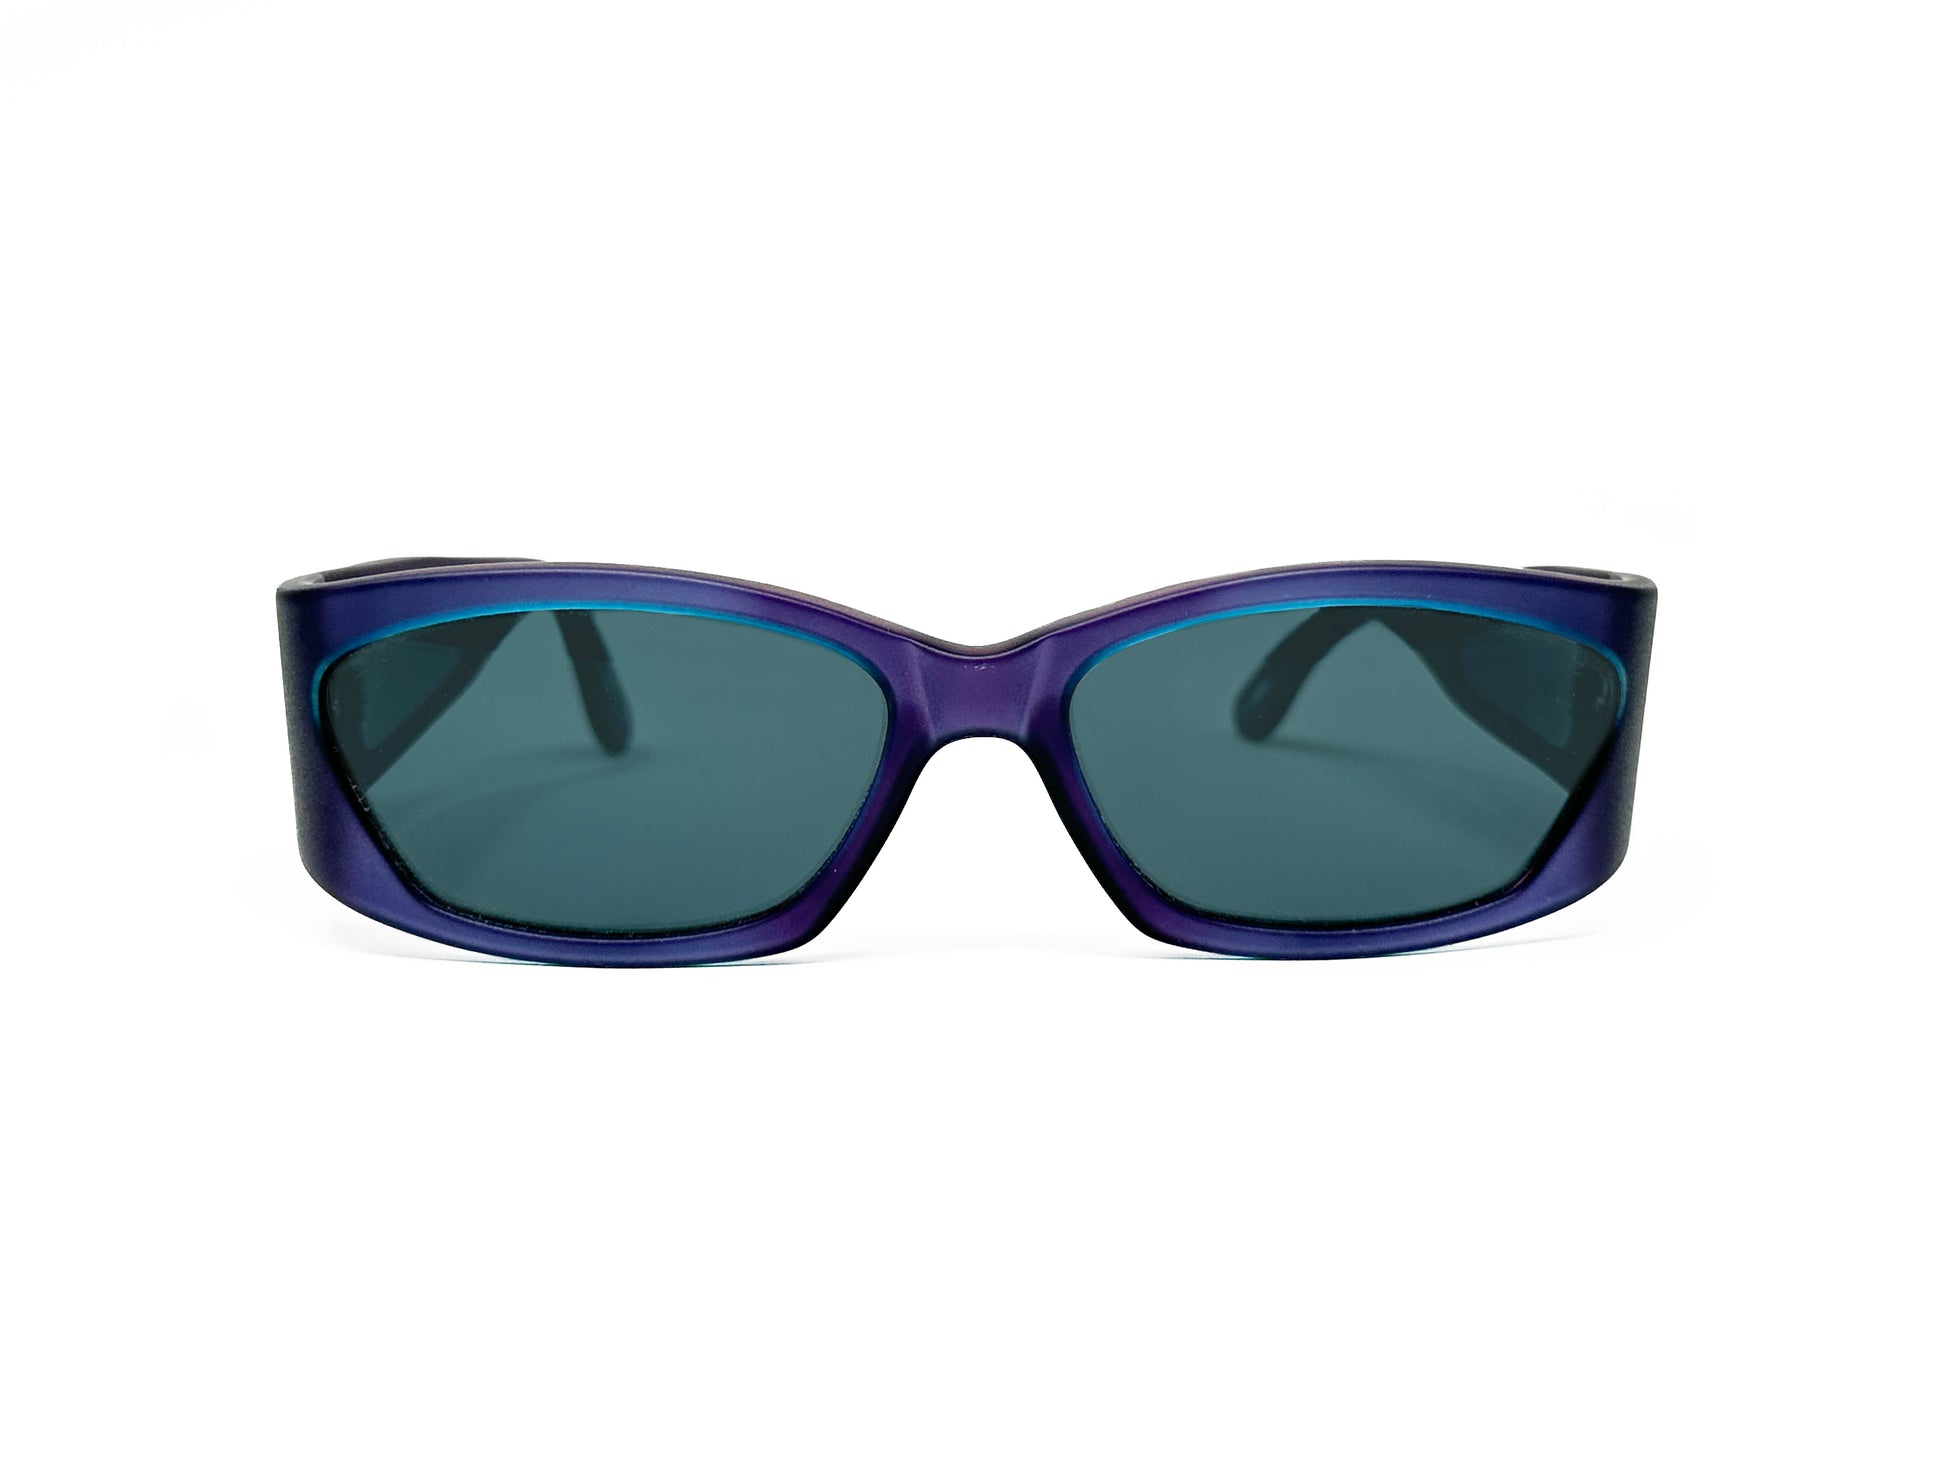 Kador rectangular, acetate sunglasses with cat-eye shaped lens. Model: DF26. Color: M/DBA363 - Purple with blue lenses. Front view.